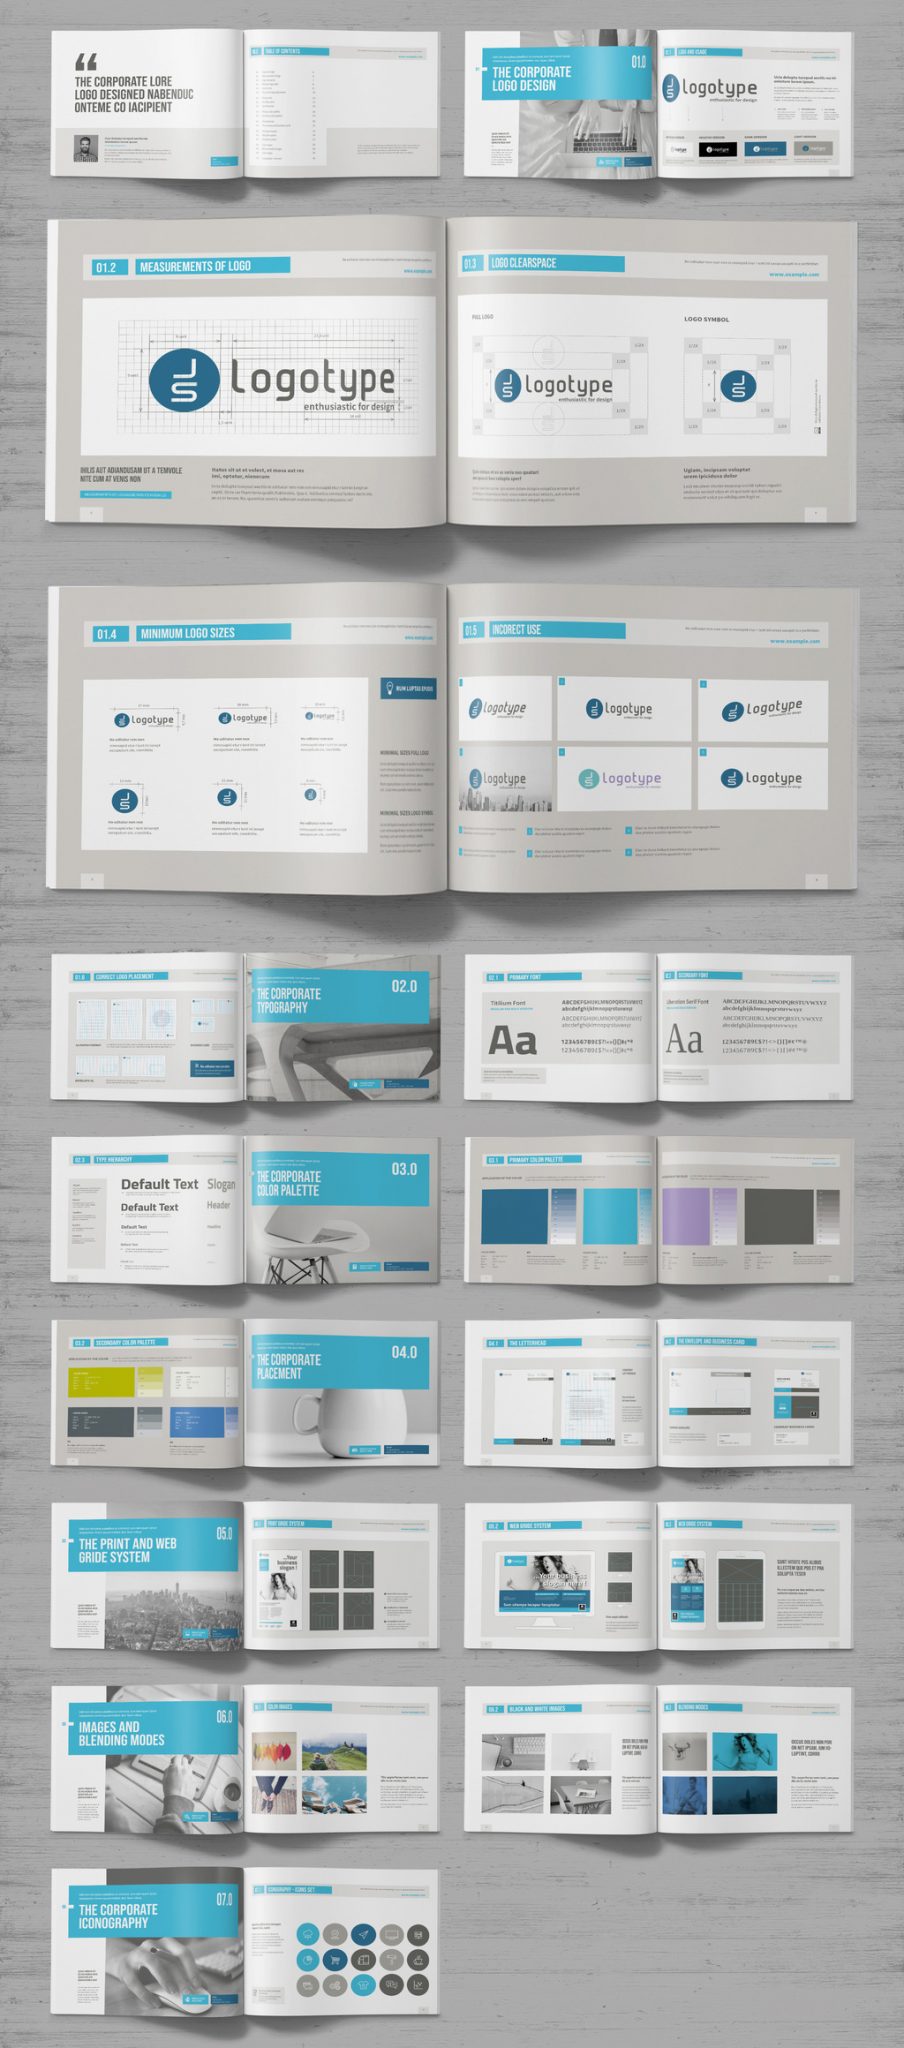 Adobe InDesign Brand Manual Template with Blue Accents